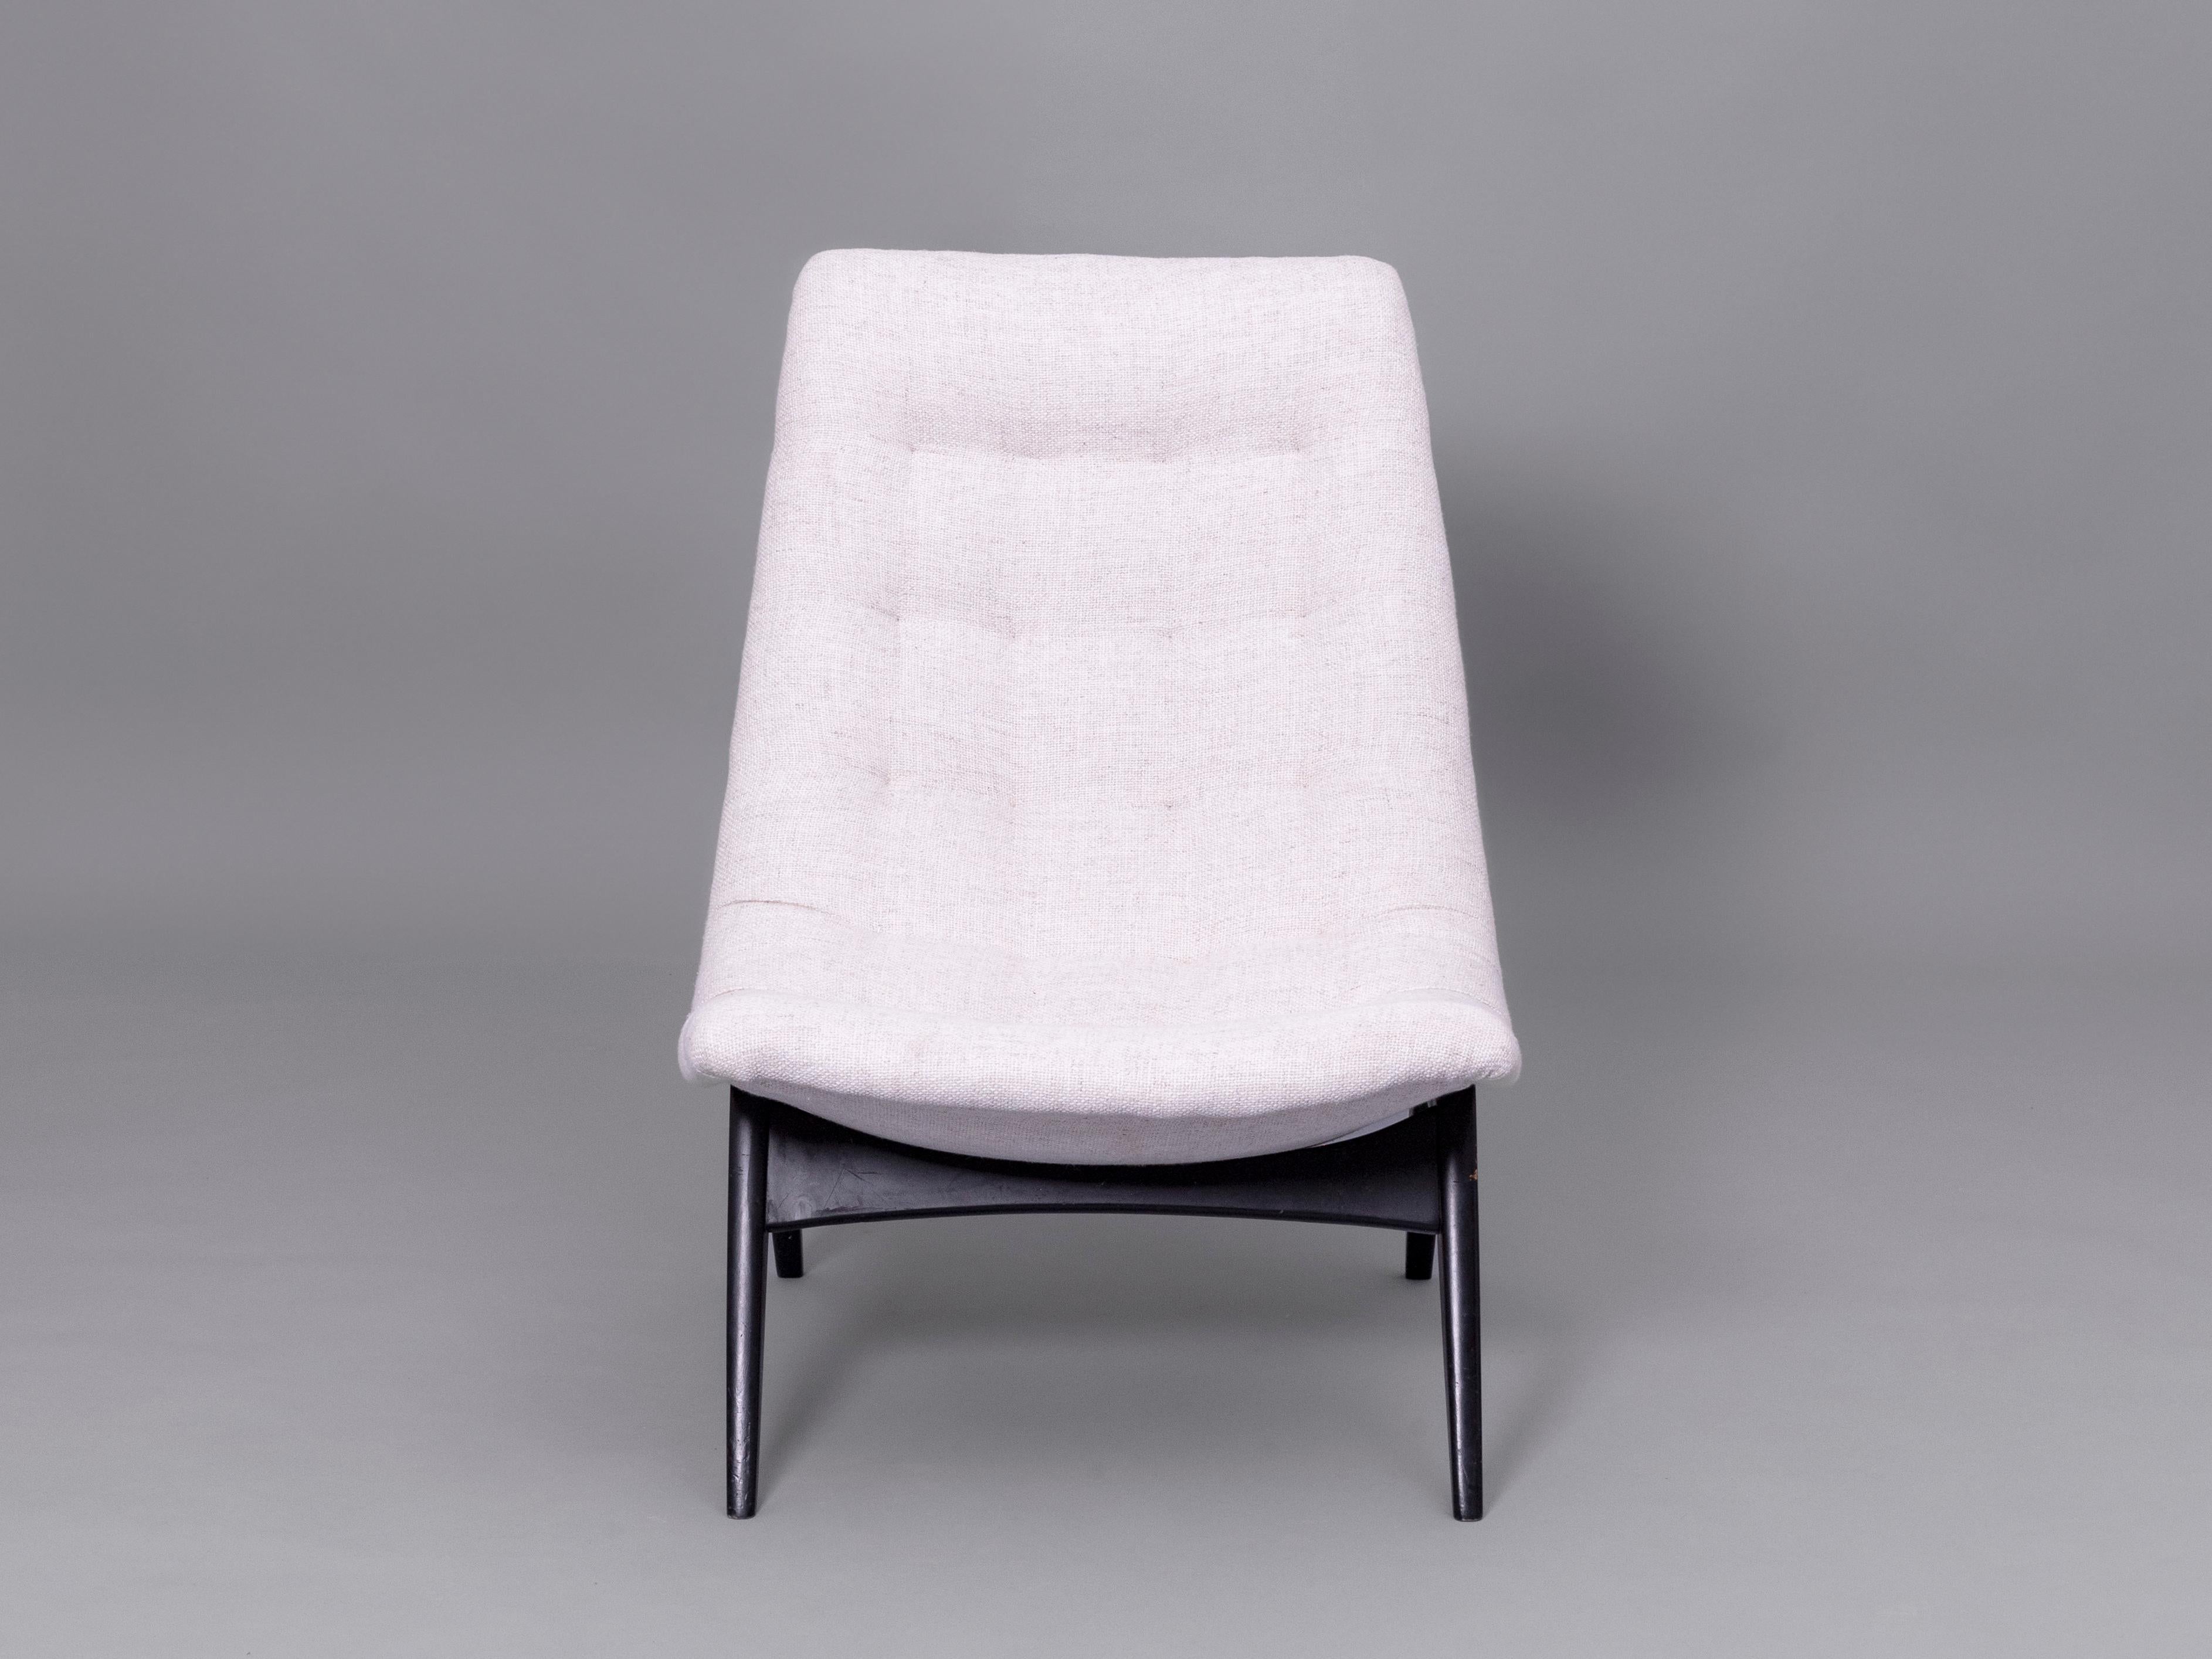 Upholstery and Black Laqcuered wood seat designed by Svante Skogh for Olof Perssons Fåtöljindustri, Jönköping. Sweden, 1950s

This Piece was designed following the rules of scandinavian mid century style, the piece features simple lines giving up